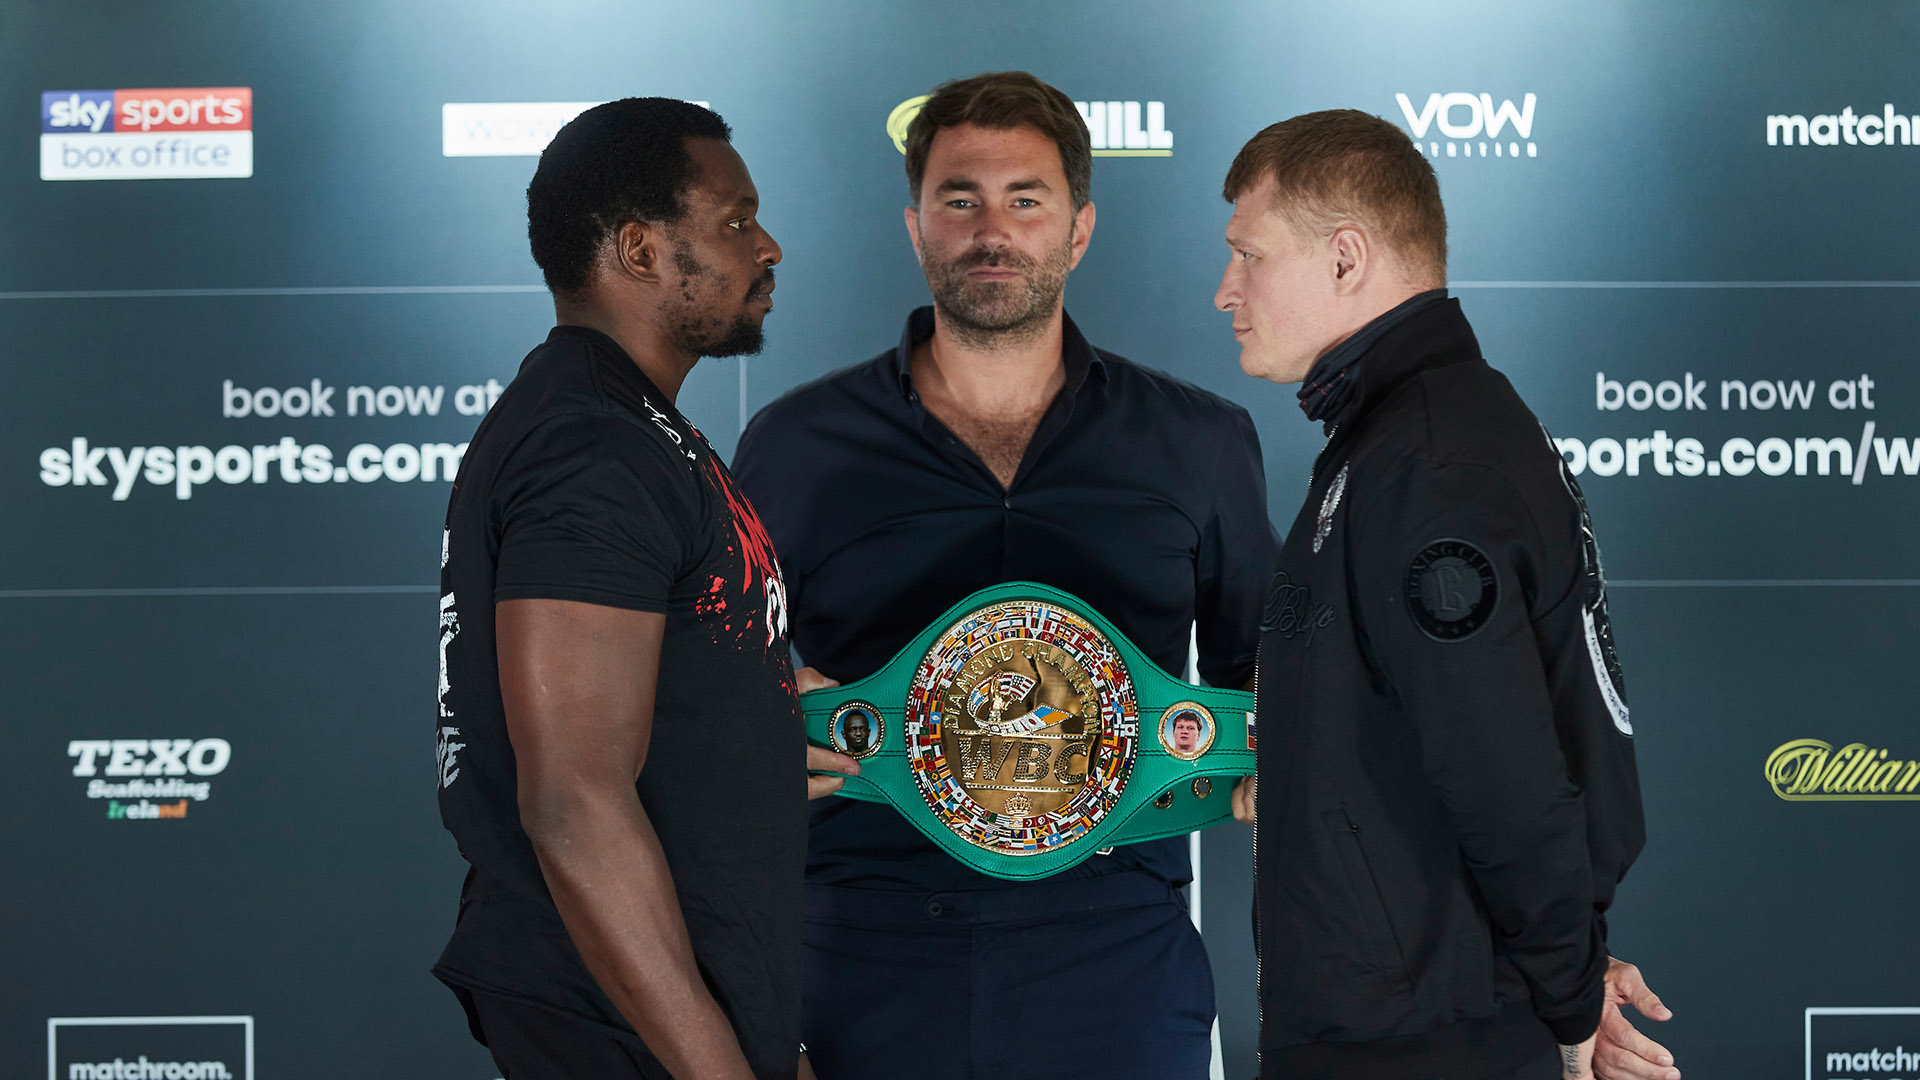 Dillian Whyte v Alexander Povetkin Fight time, PPV TV channel and cost, streaming, betting odds, fighter records, implications and undercard